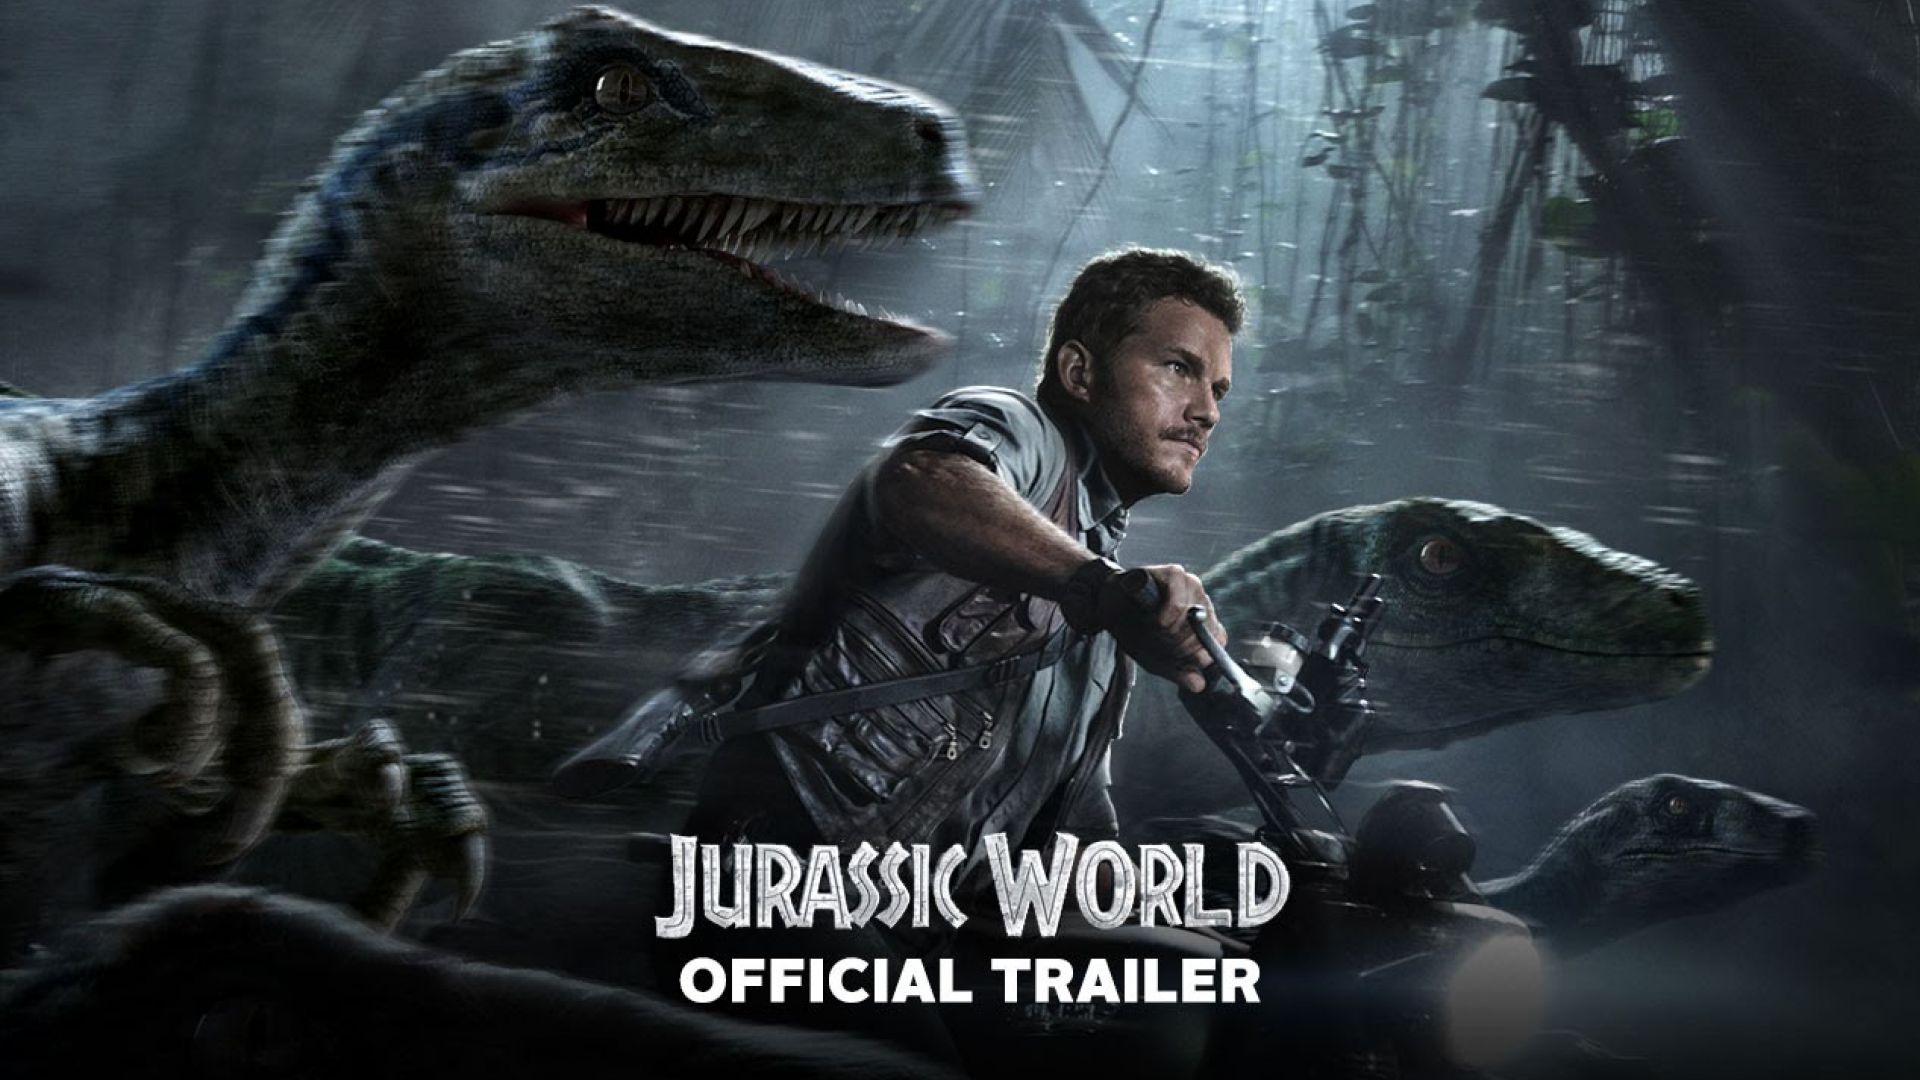 Second Official Trailer for &#039;Jurassic World&#039;